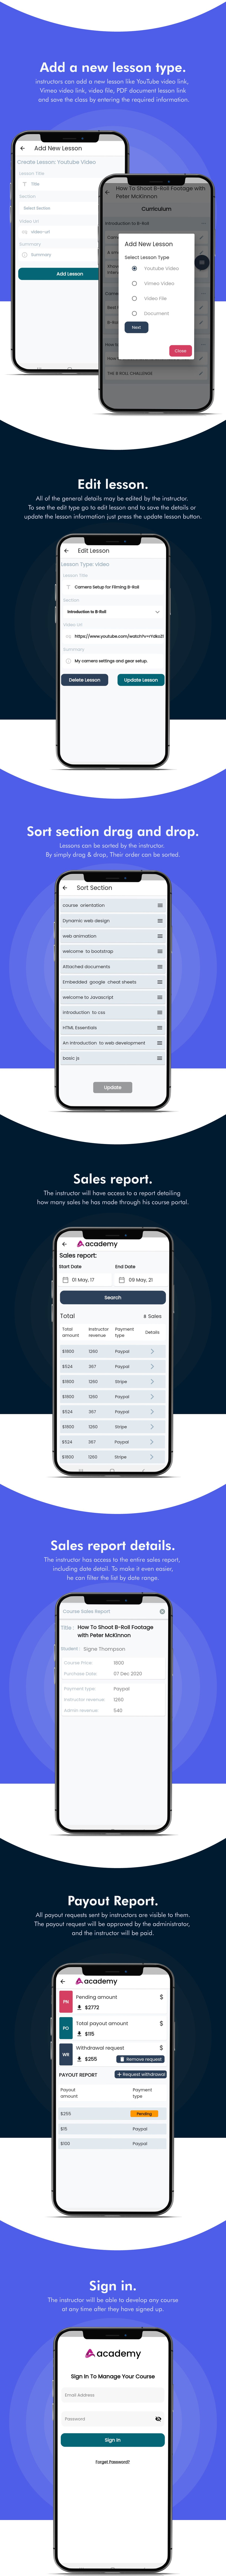 Academy Lms Instructor Mobile App - Flutter iOS & Android - 7